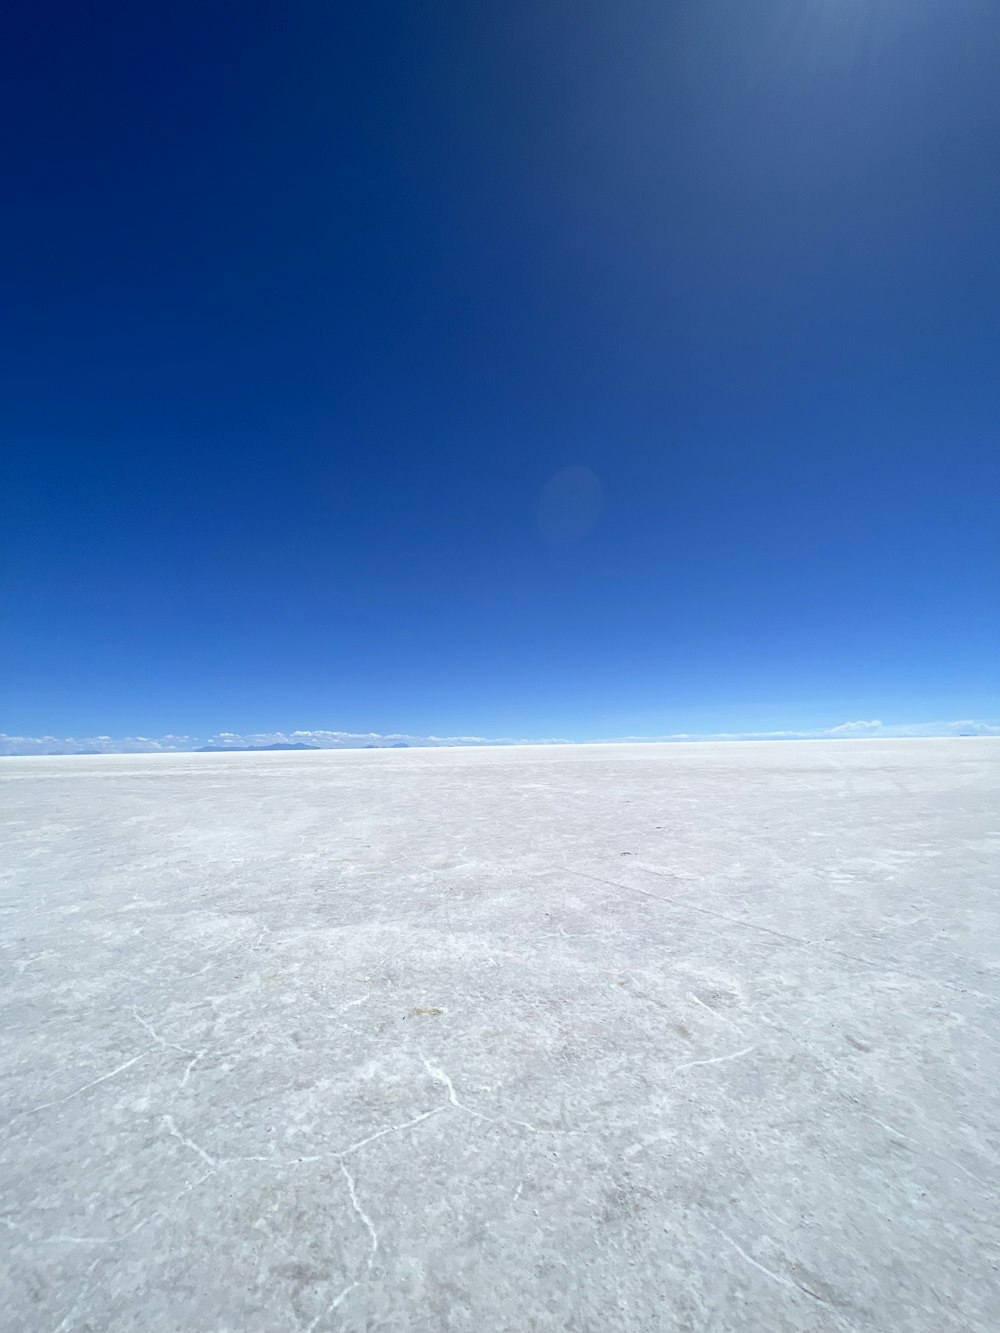 a vast expanse of ice under a bright blue sky